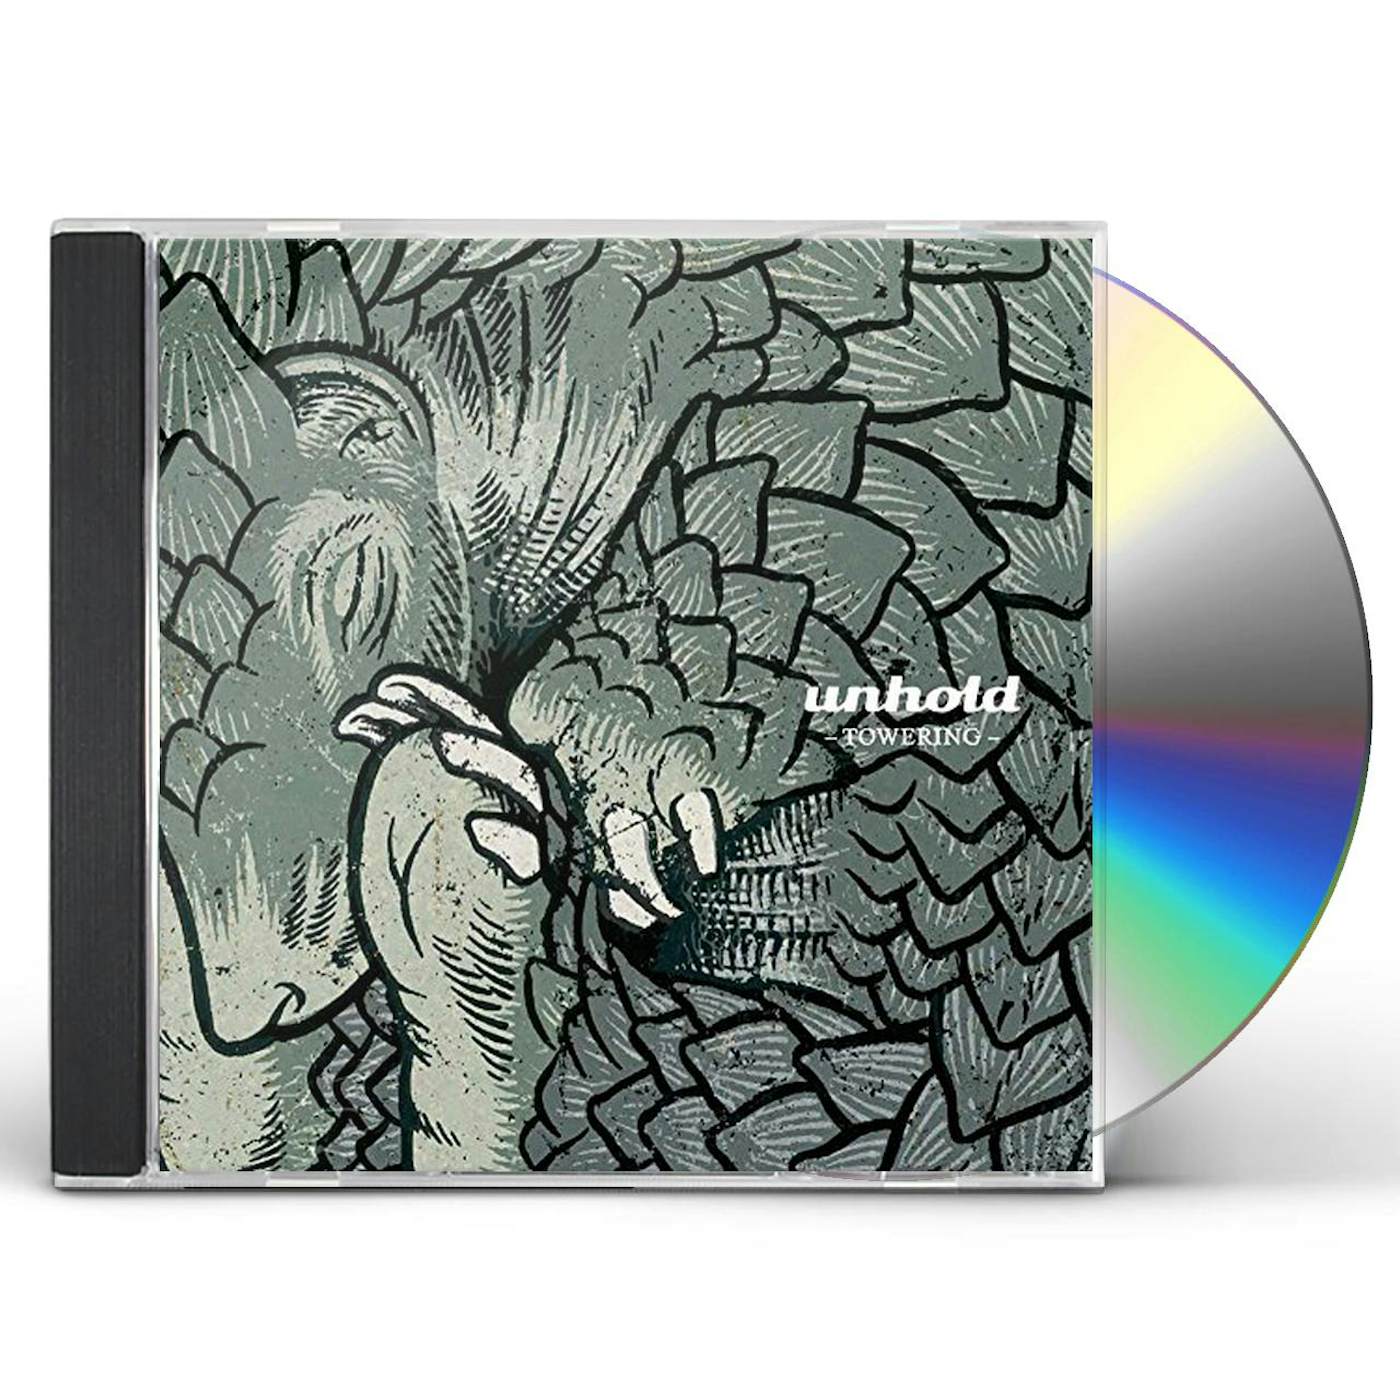 Unhold TOWERING CD